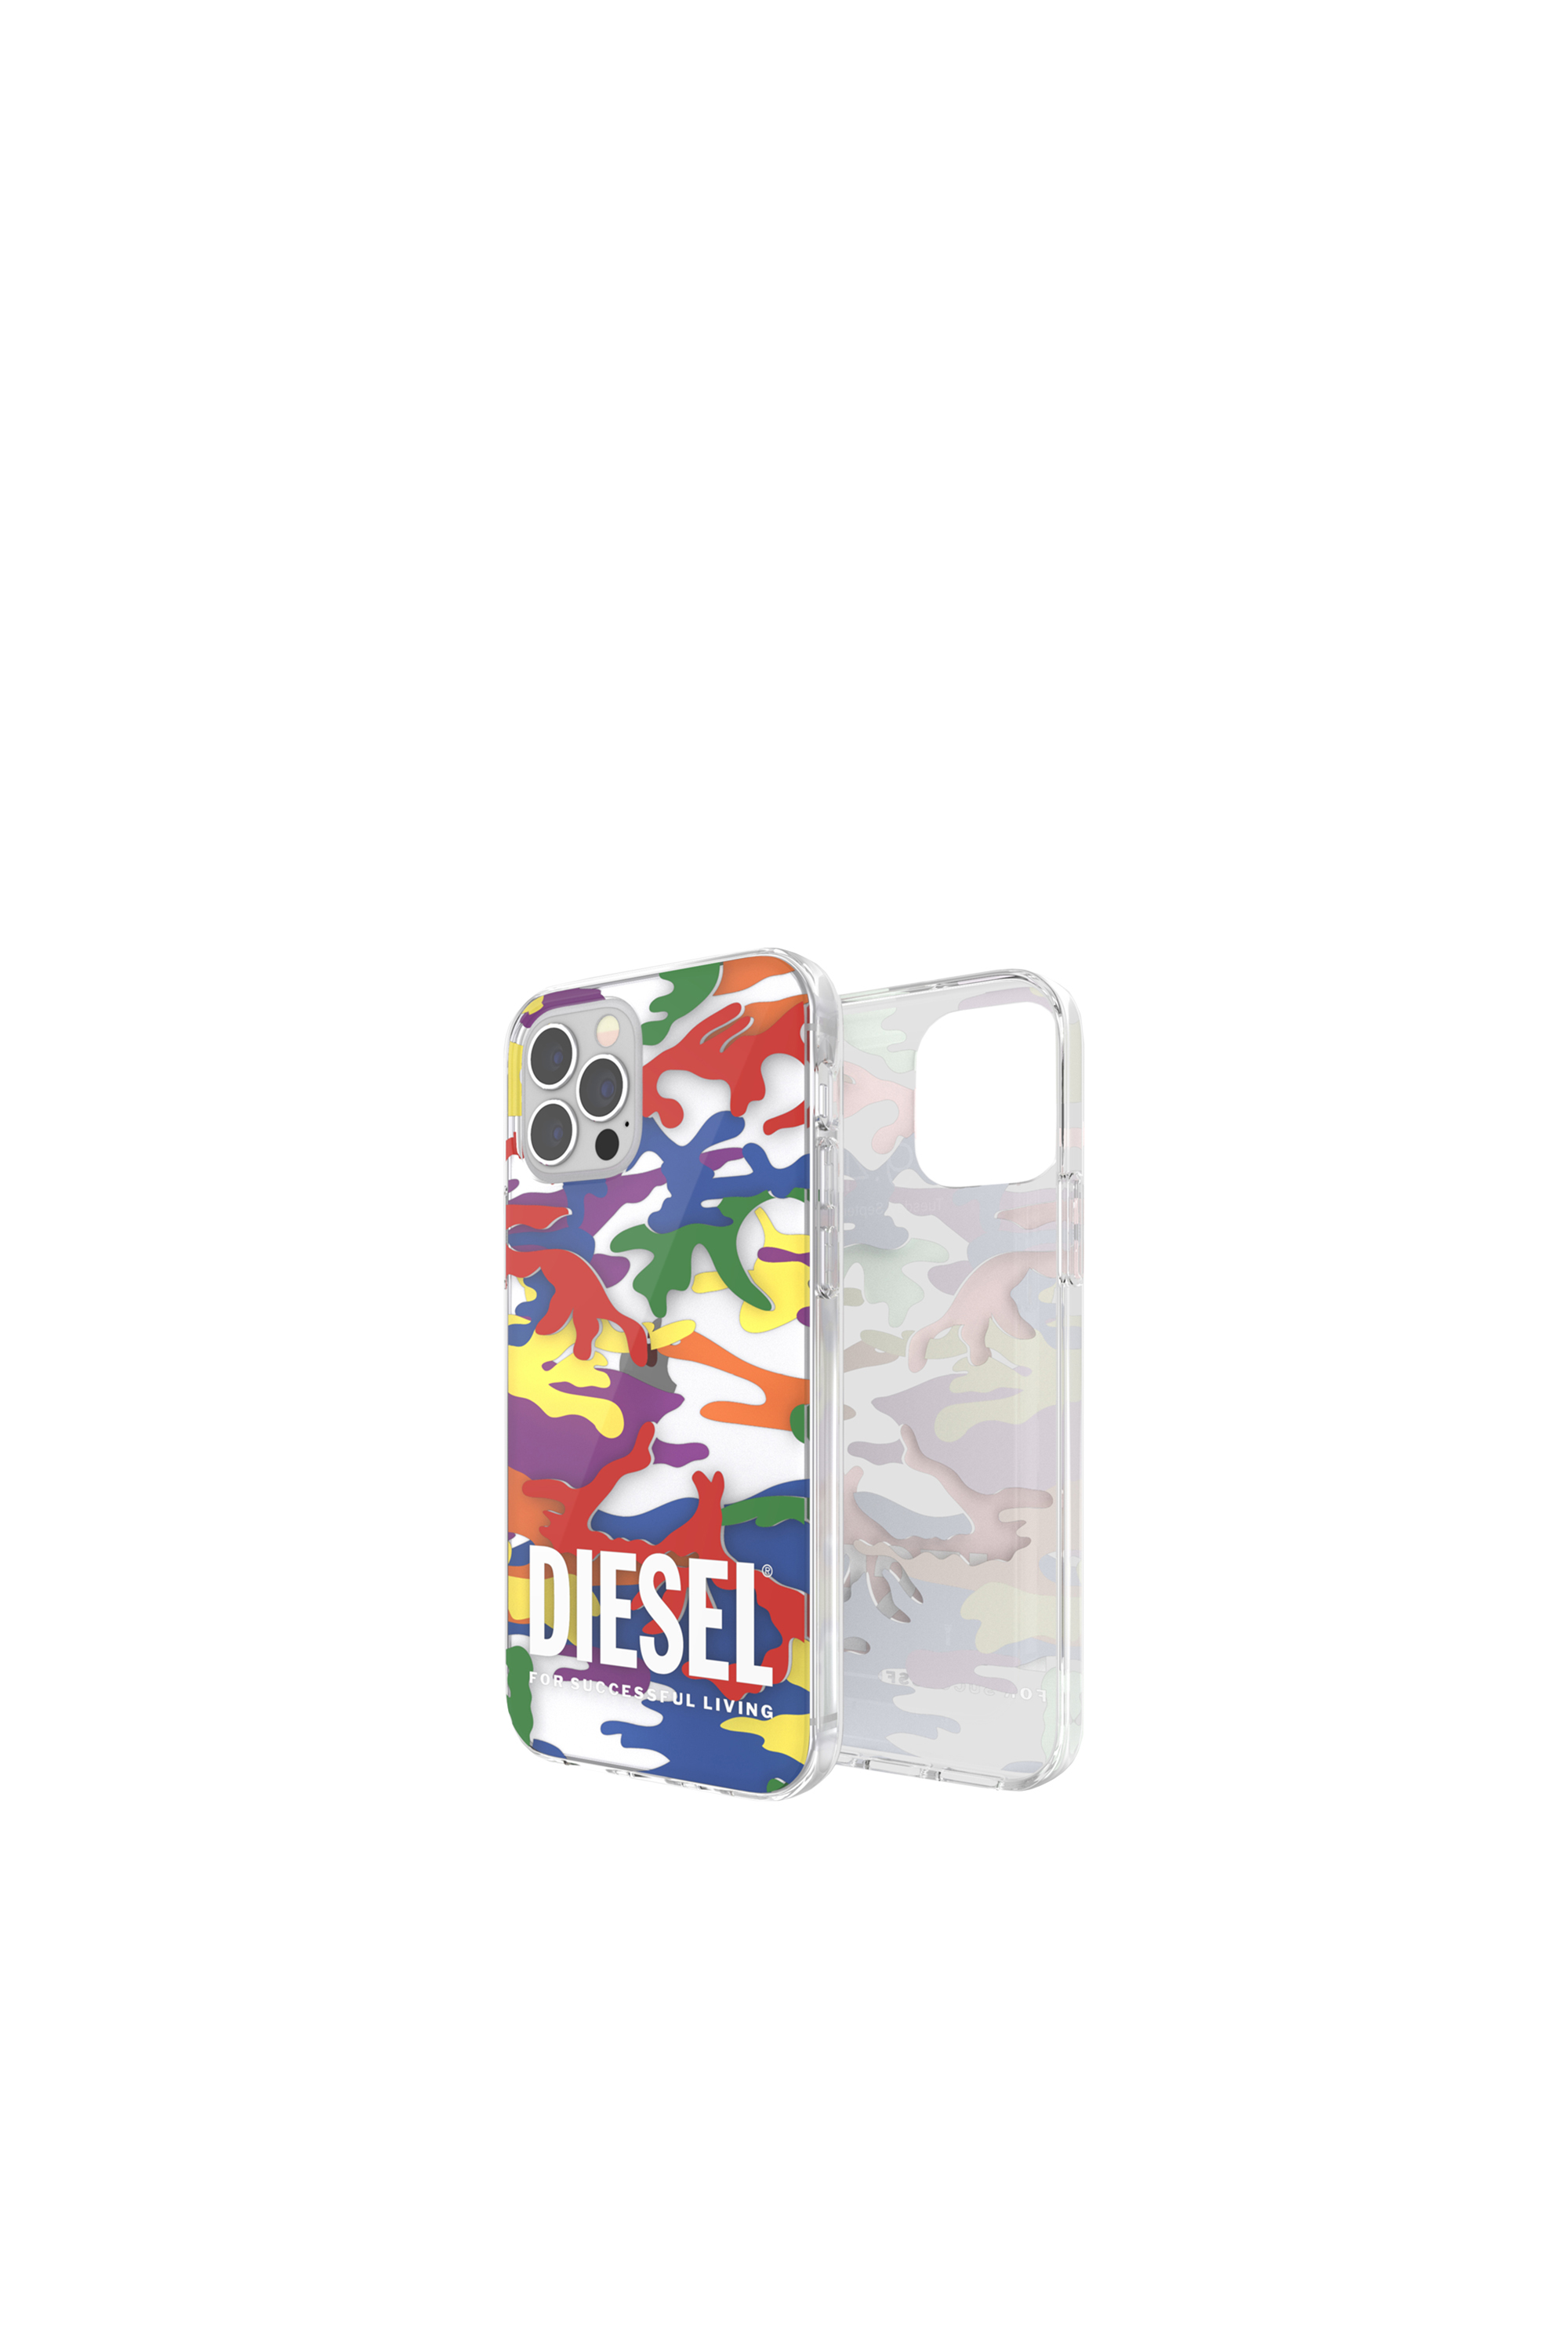 Diesel - Coque en TPU ultra-léger Pride for i Phone 12 / 12 Pro - Coques - Mixte - Polychrome